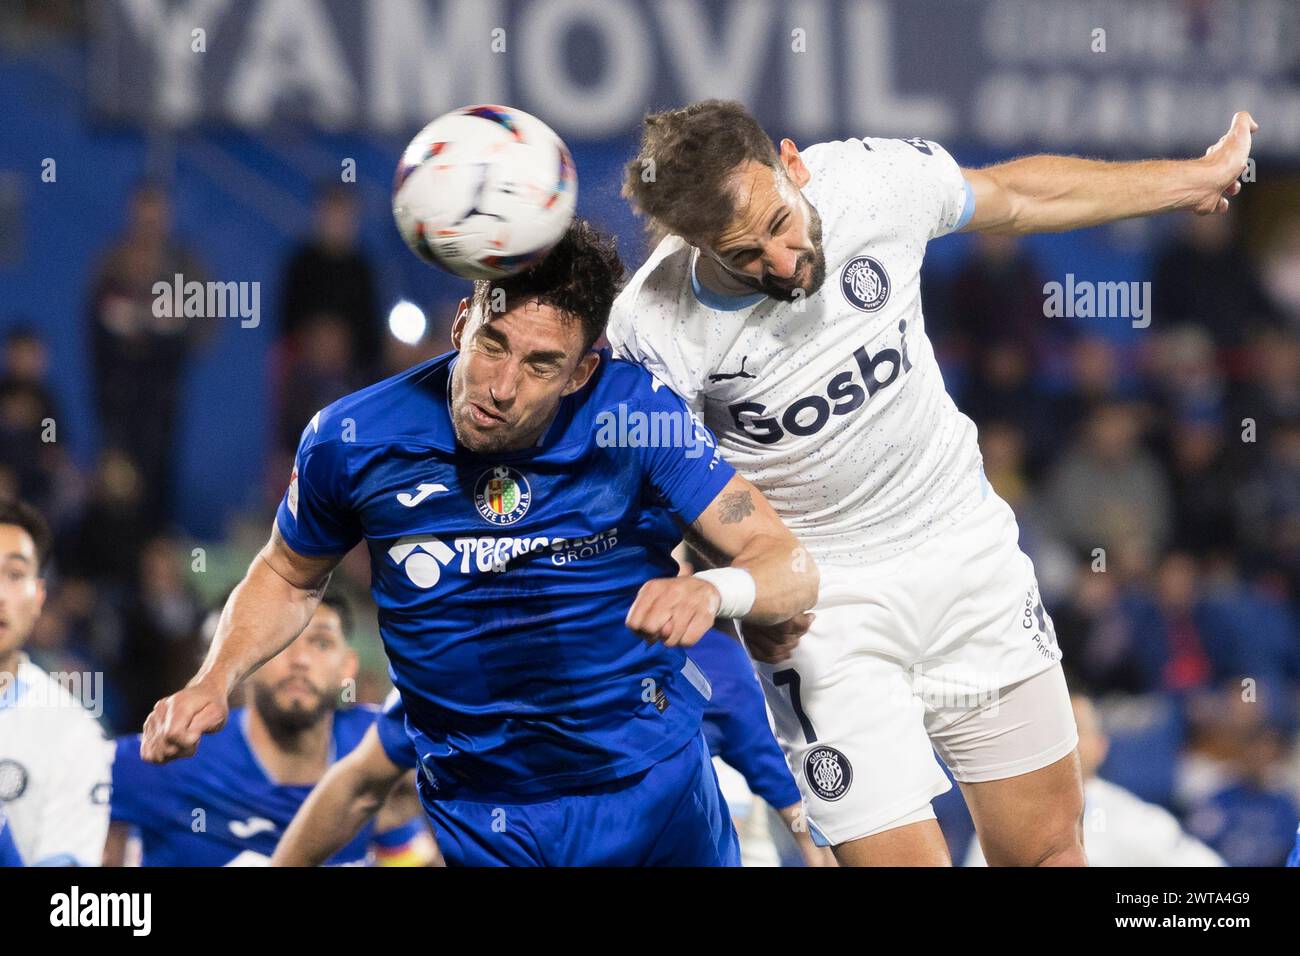 MADRID, SPAIN - March 16:Cristhian Stuani of Girona and Jaime Mata of Getafe fight for the ball during the La liga 2023/24 match between Getafe and Girona at Coliseum Stadium. Credit: Guille Martinez/AFLO/Alamy Live News Stock Photo